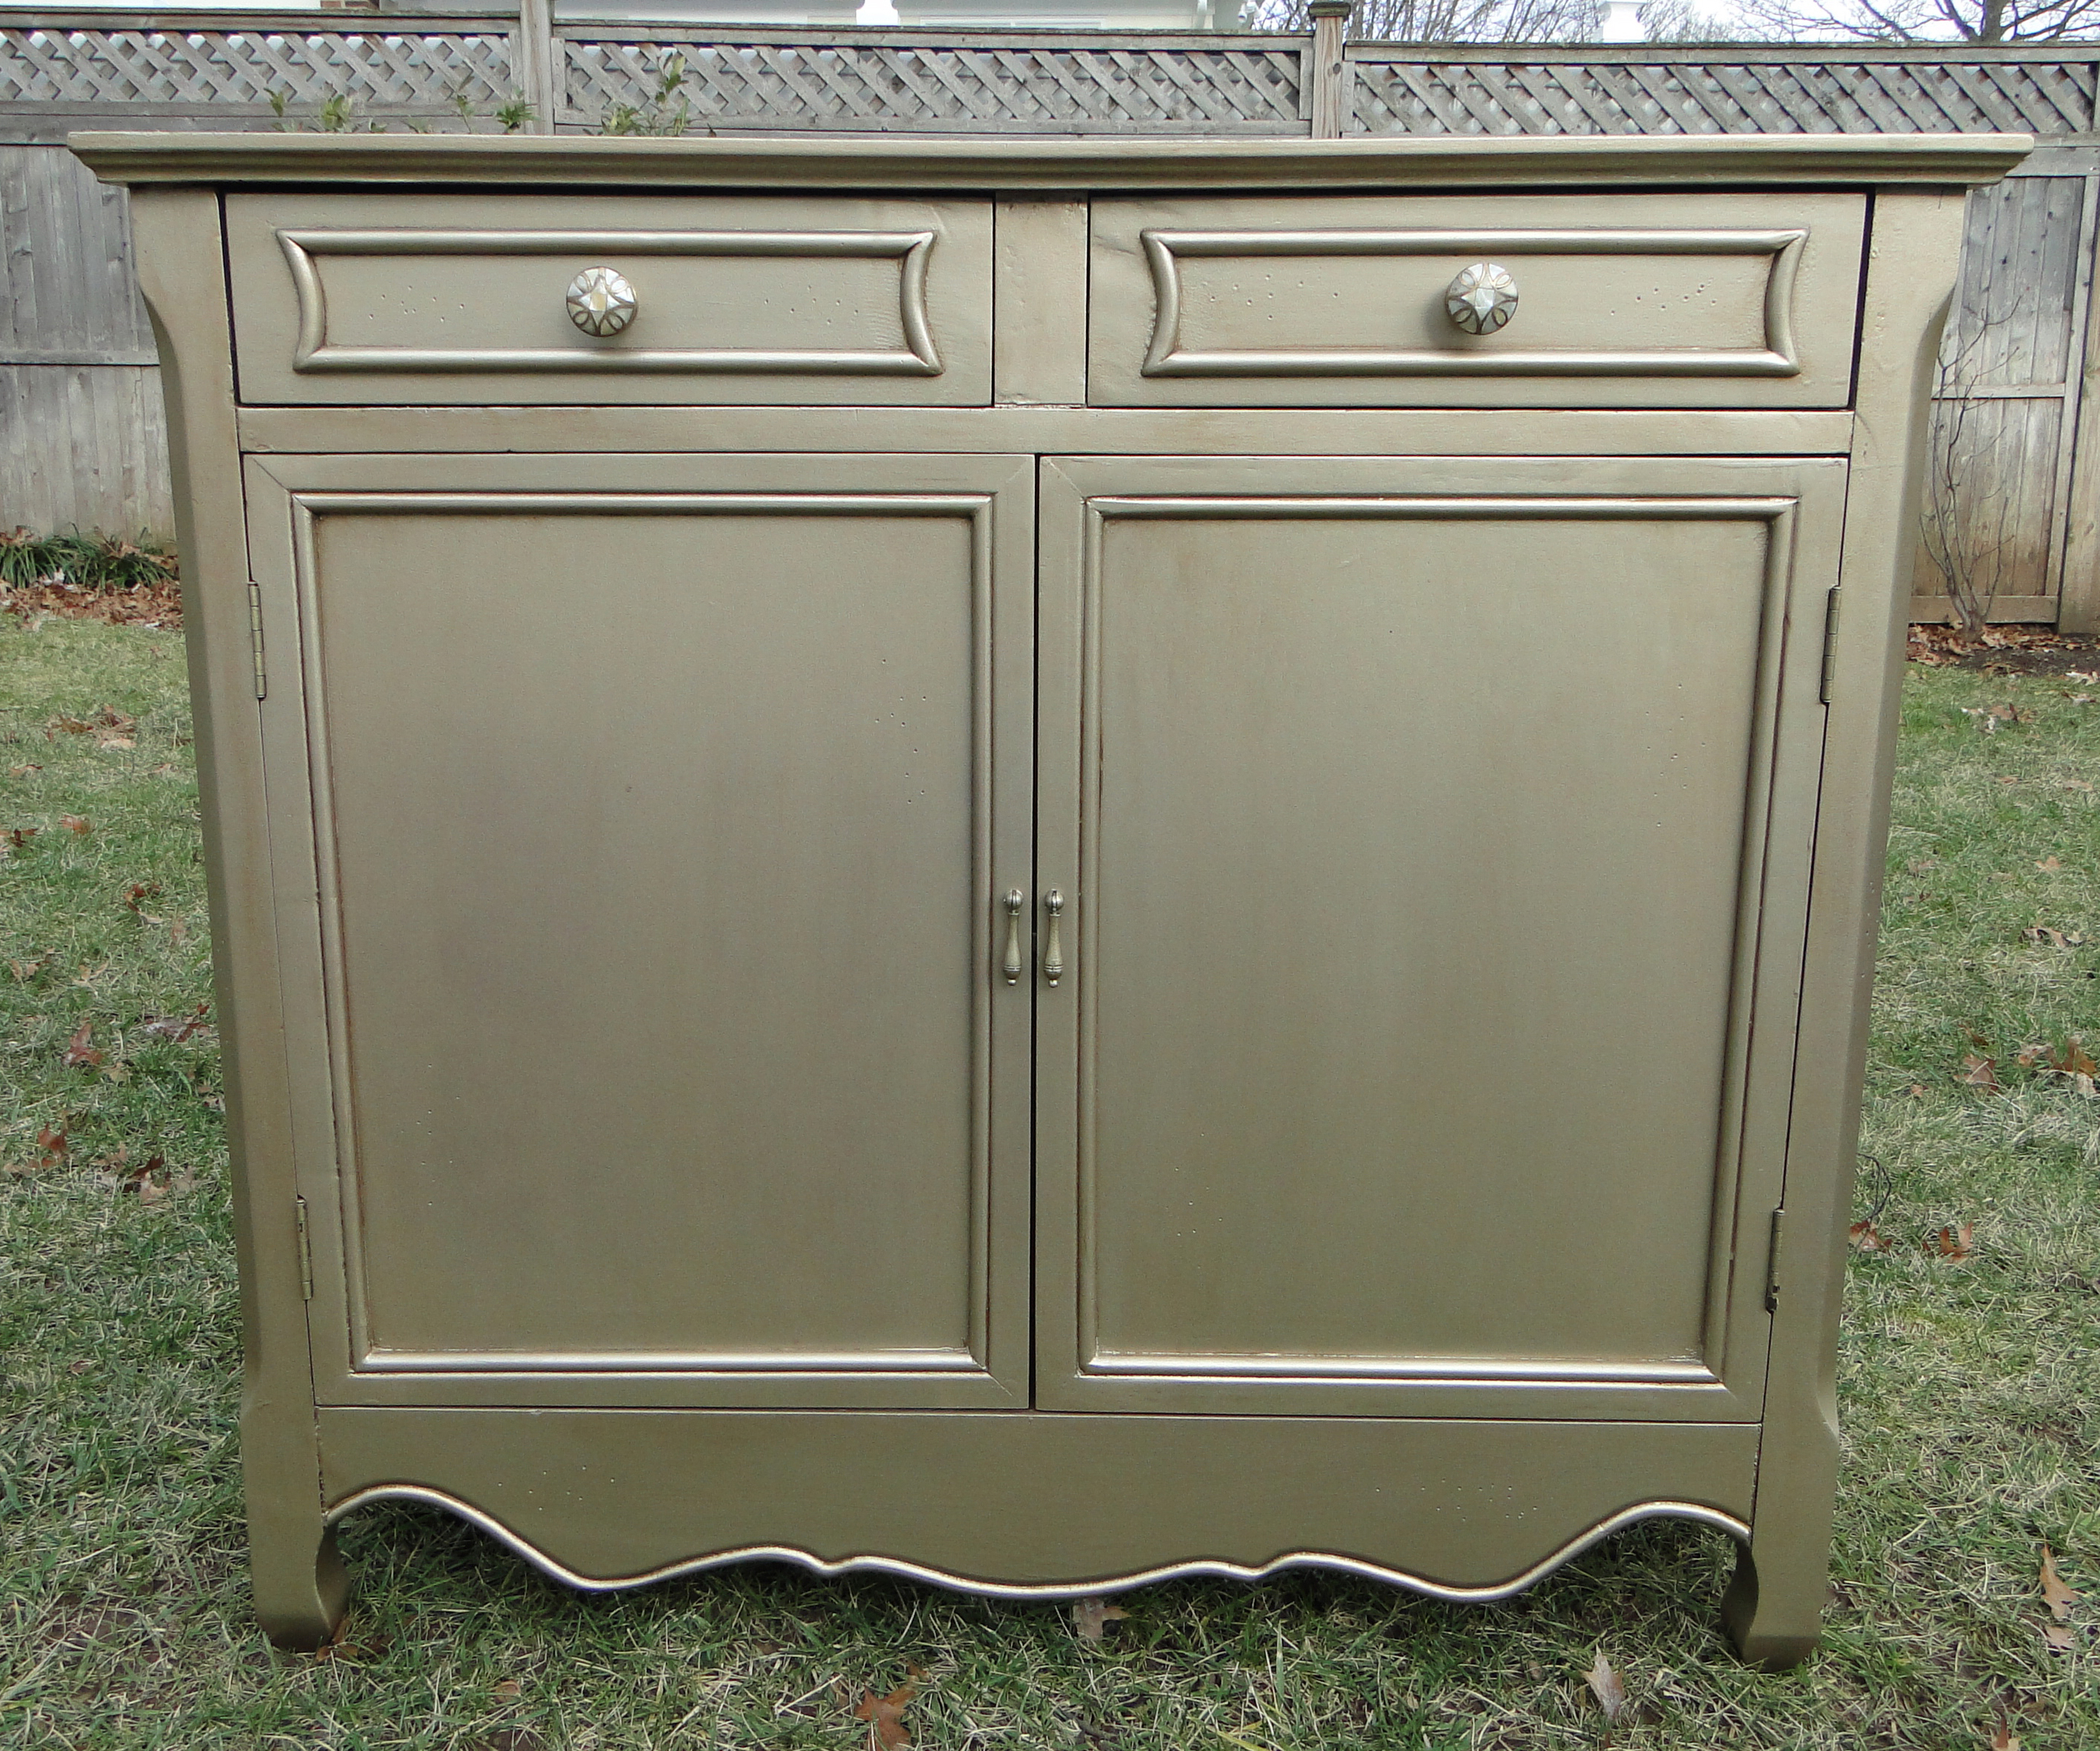 "After" photo of re-imagined cabinet